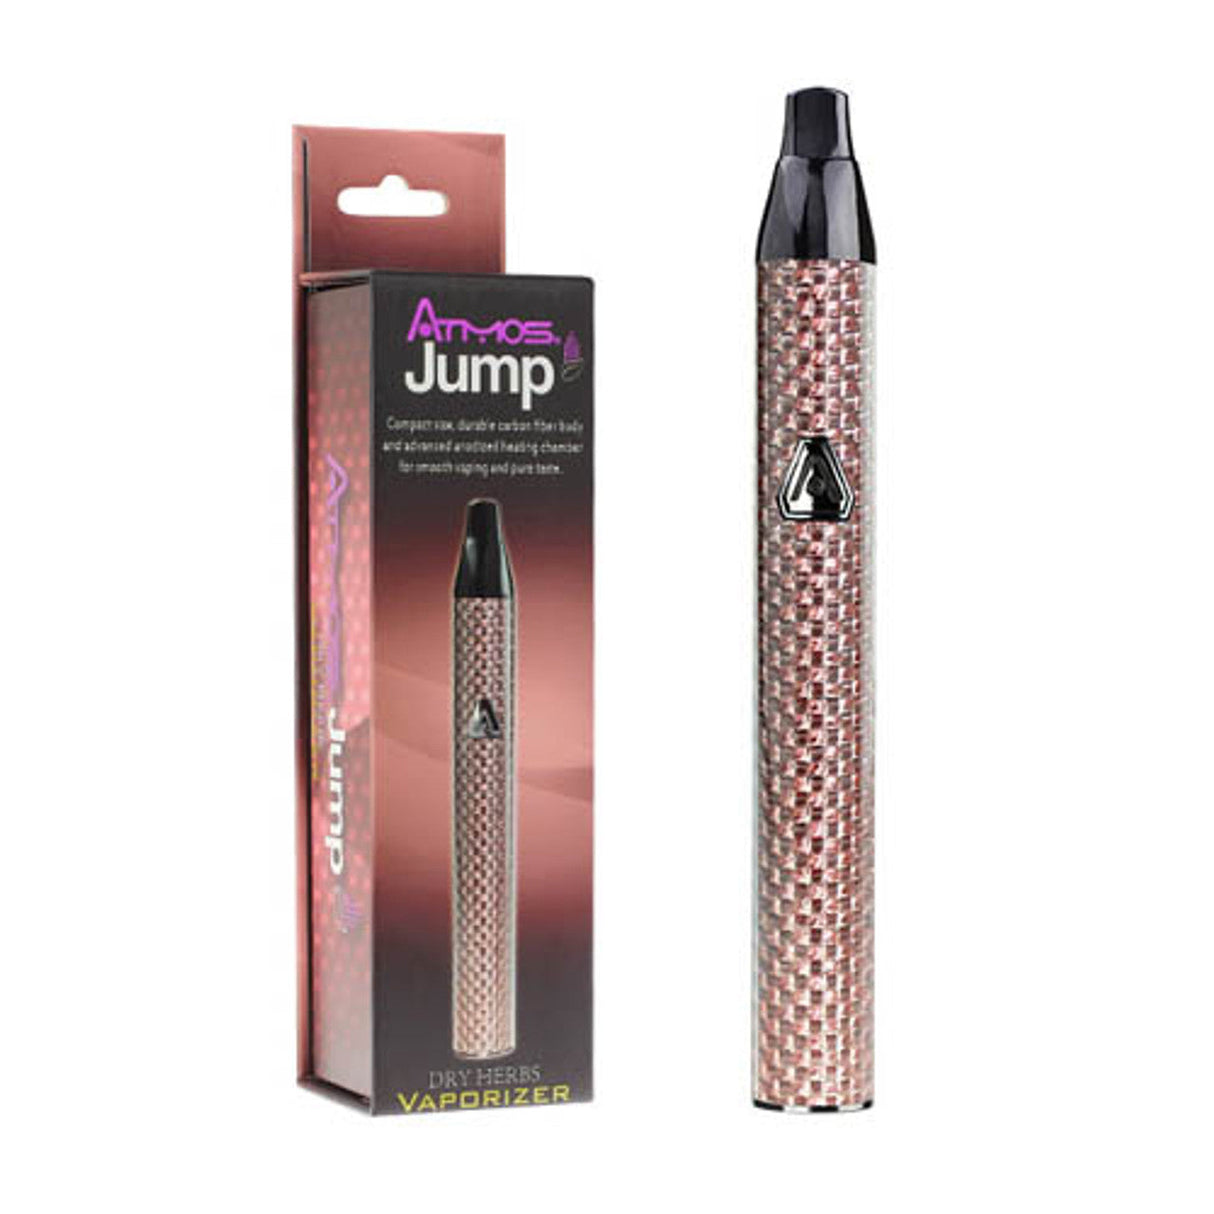 Atmos Jump Vaporizer in carbon fiber design, portable for dry herbs, battery powered, front view